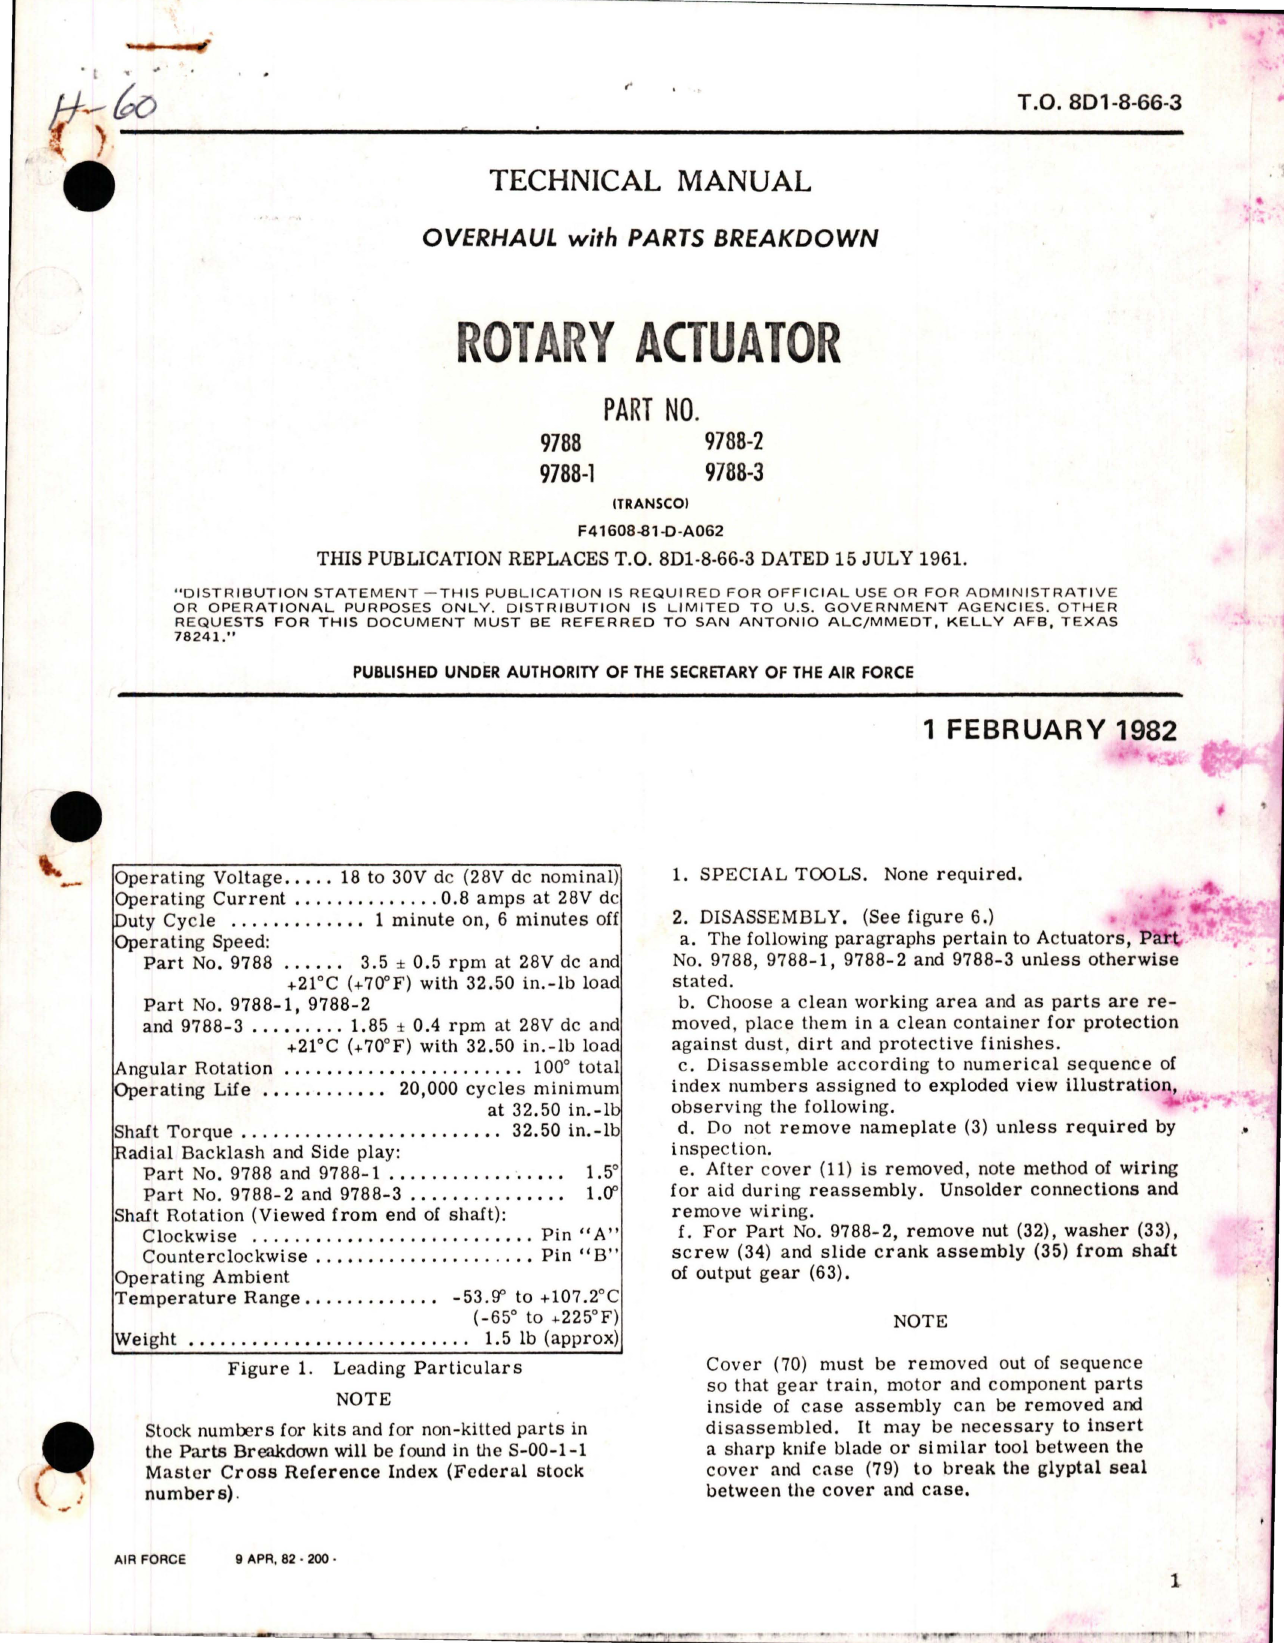 Sample page 1 from AirCorps Library document: Overhaul with Parts Breakdown for Rotary Actuator - Parts 9788, 9788-1, 9788-2, 9788-3